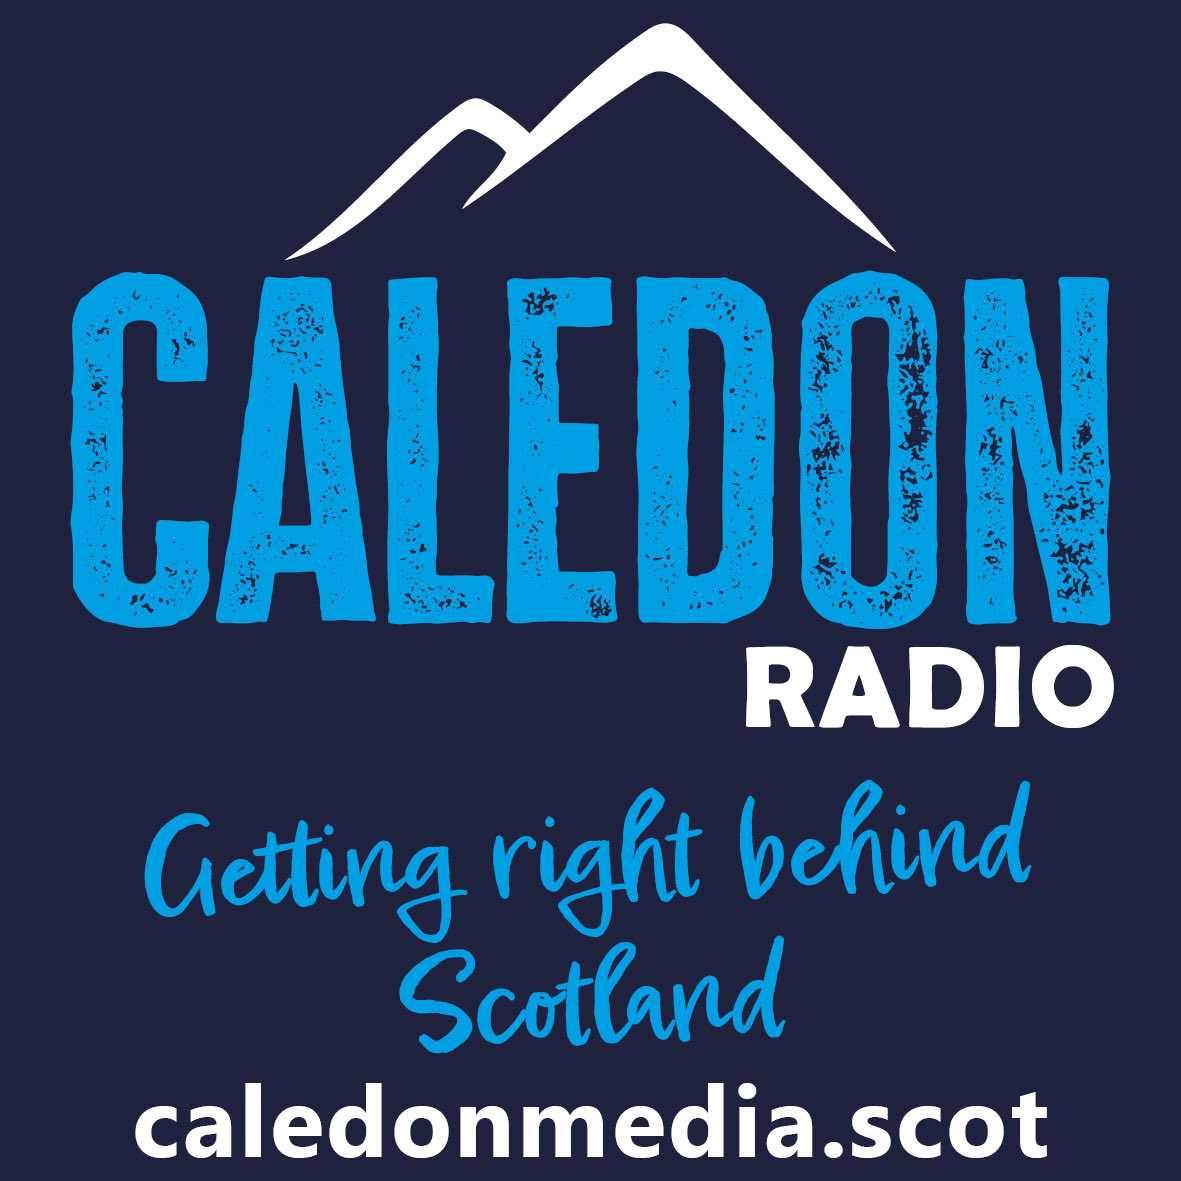 Folk more and more Scots need to start listening to Scottish Radio stations. 

My go to is Caledon Radio @HunterNorrie for politics, trad show etc.

whatever you do give them all a listen as they promote our scottish history, culture & identity.

Something the MSM don’t. 📻🎵🏴󠁧󠁢󠁳󠁣󠁴󠁿